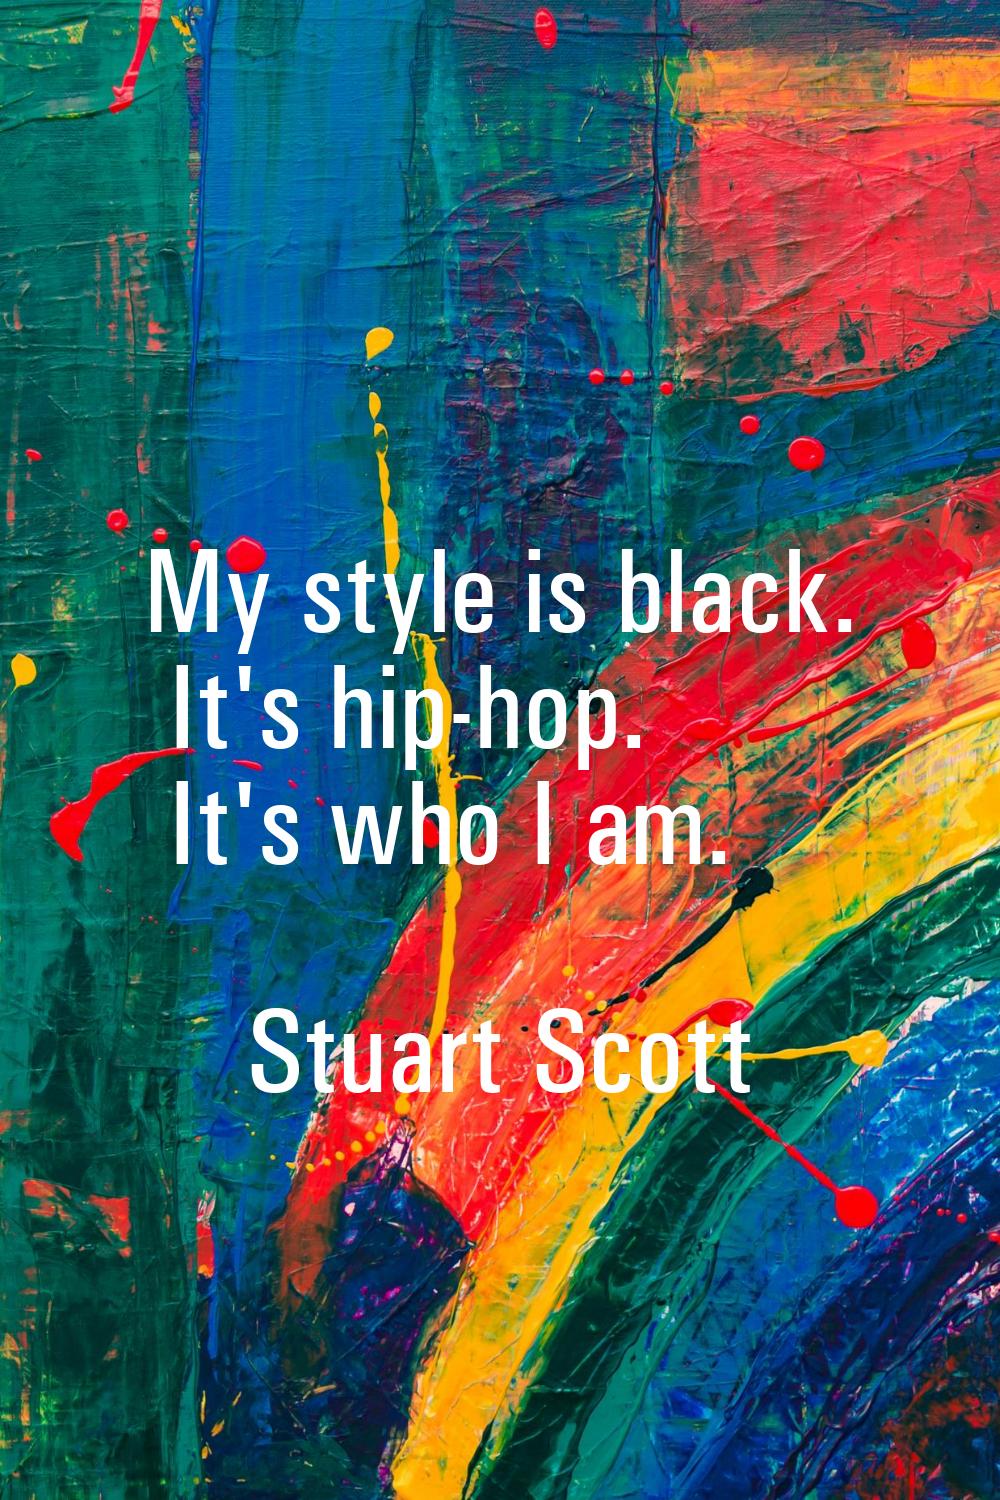 My style is black. It's hip-hop. It's who I am.